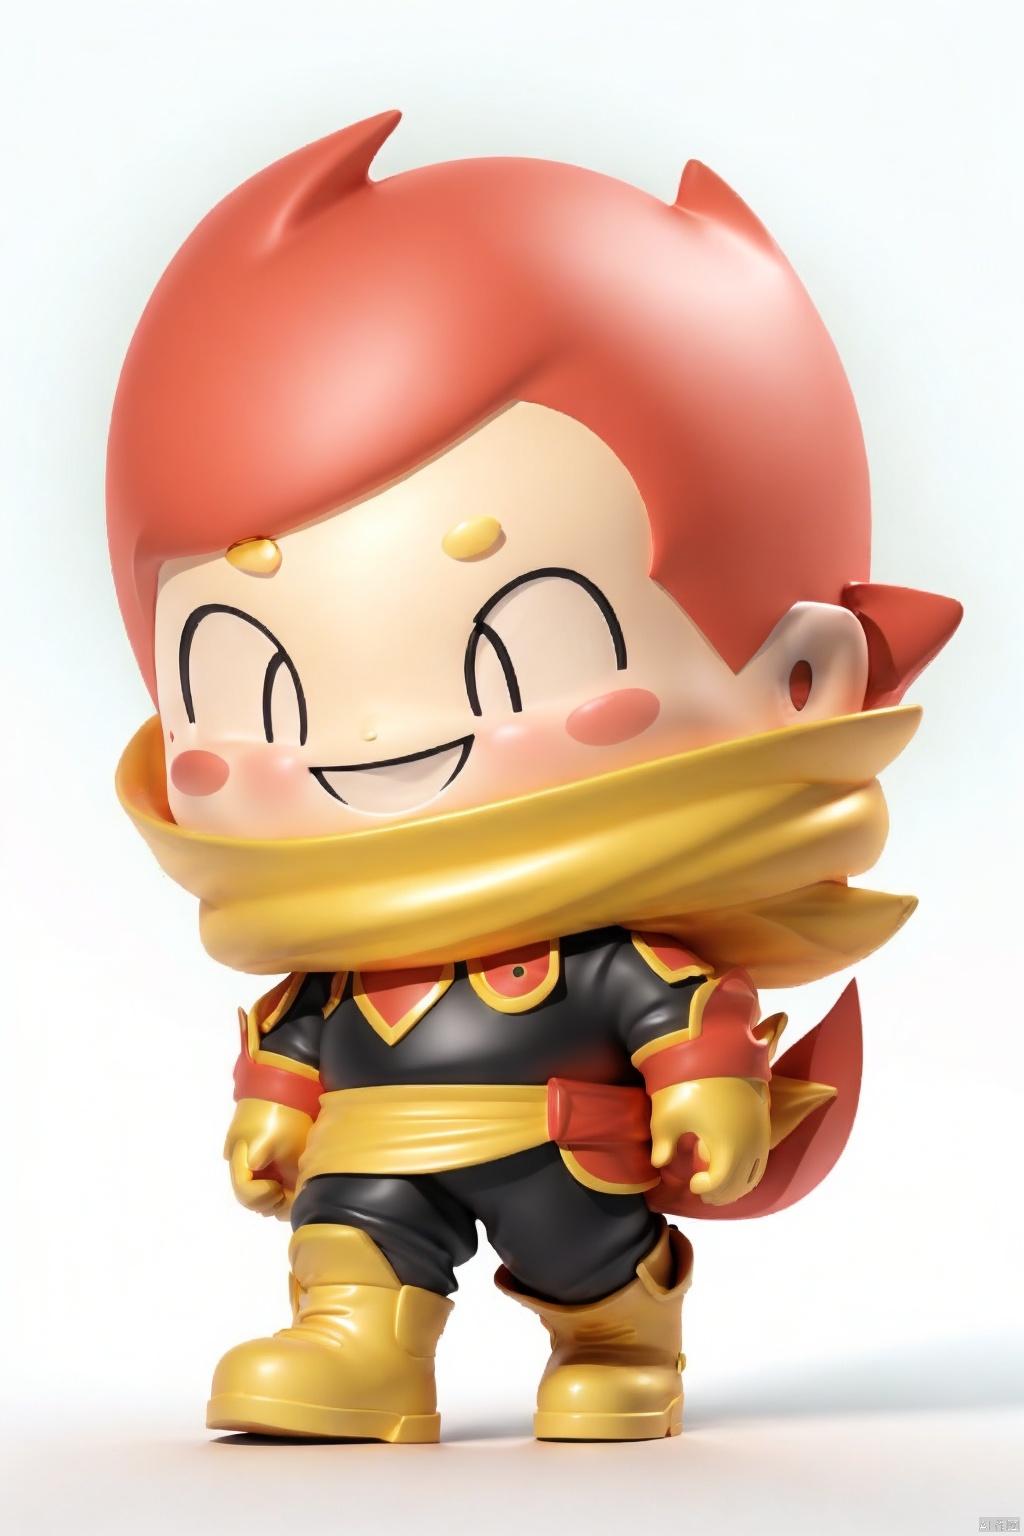 XK, single person, 1-boy, male focus, golden scarf, black armor, pink shoulder pads, metal edging, brown boots, carrying a curved knife, smiling, simple background, full body, red hair, (running), open arms, sci-fi city, neon lights, full body, 